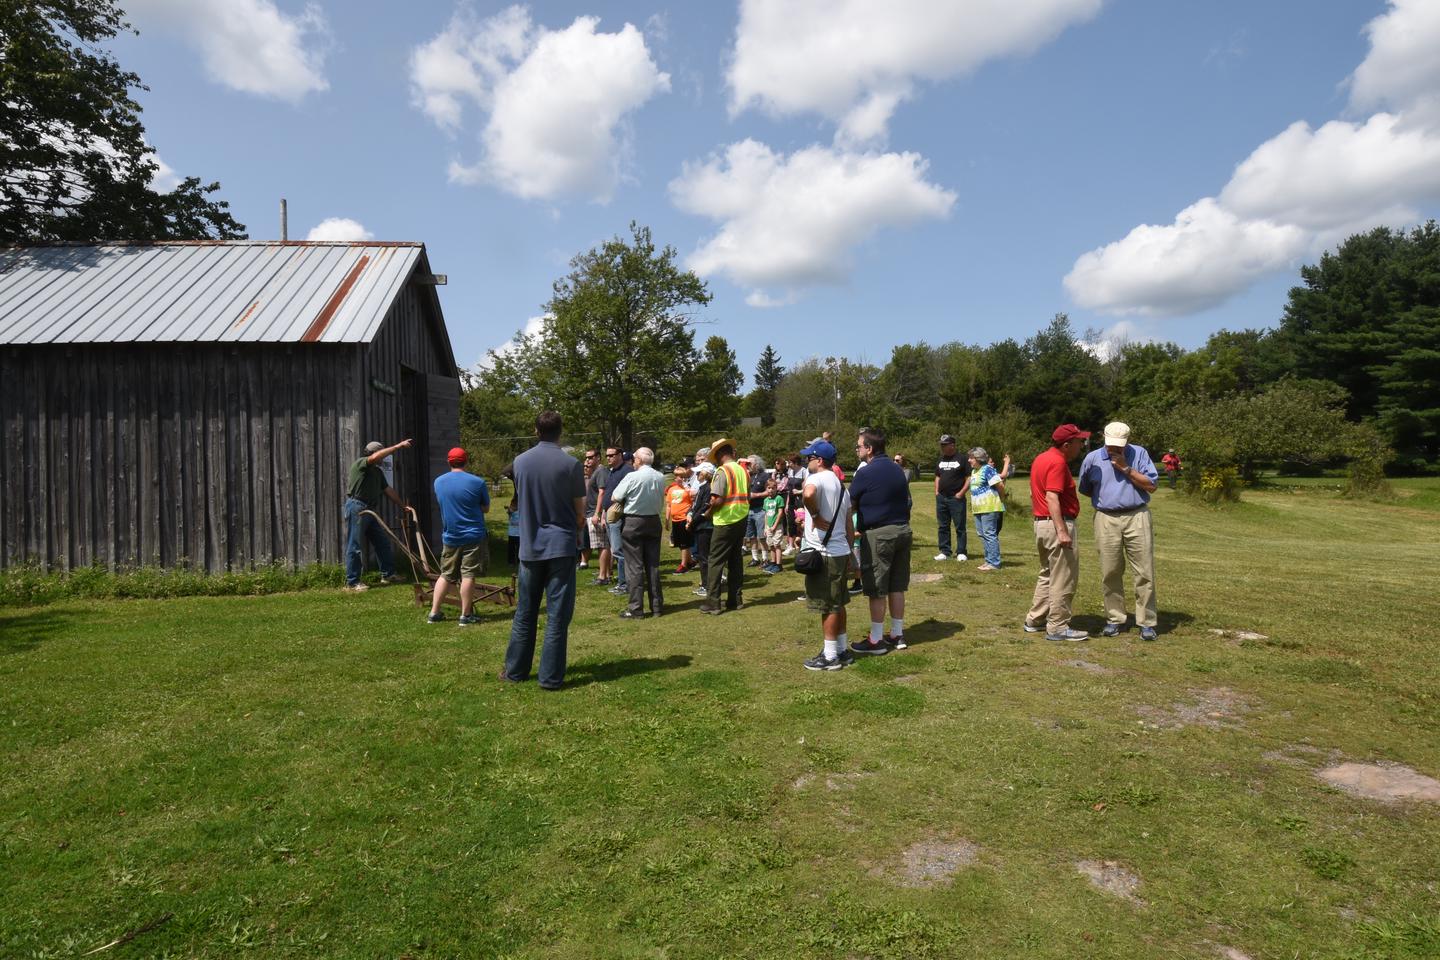 A crowd of approximately 30 people gathered outdoors in front of historic ice houseMembers of the Coolbaugh Township Historical Association provide an optional walking tour of the Tobyhanna Millpond #1 Ice House where an ice harvest is held each year. It is about a ½ mile walk to see historic ice harvesting tools and ice that was harvested in January